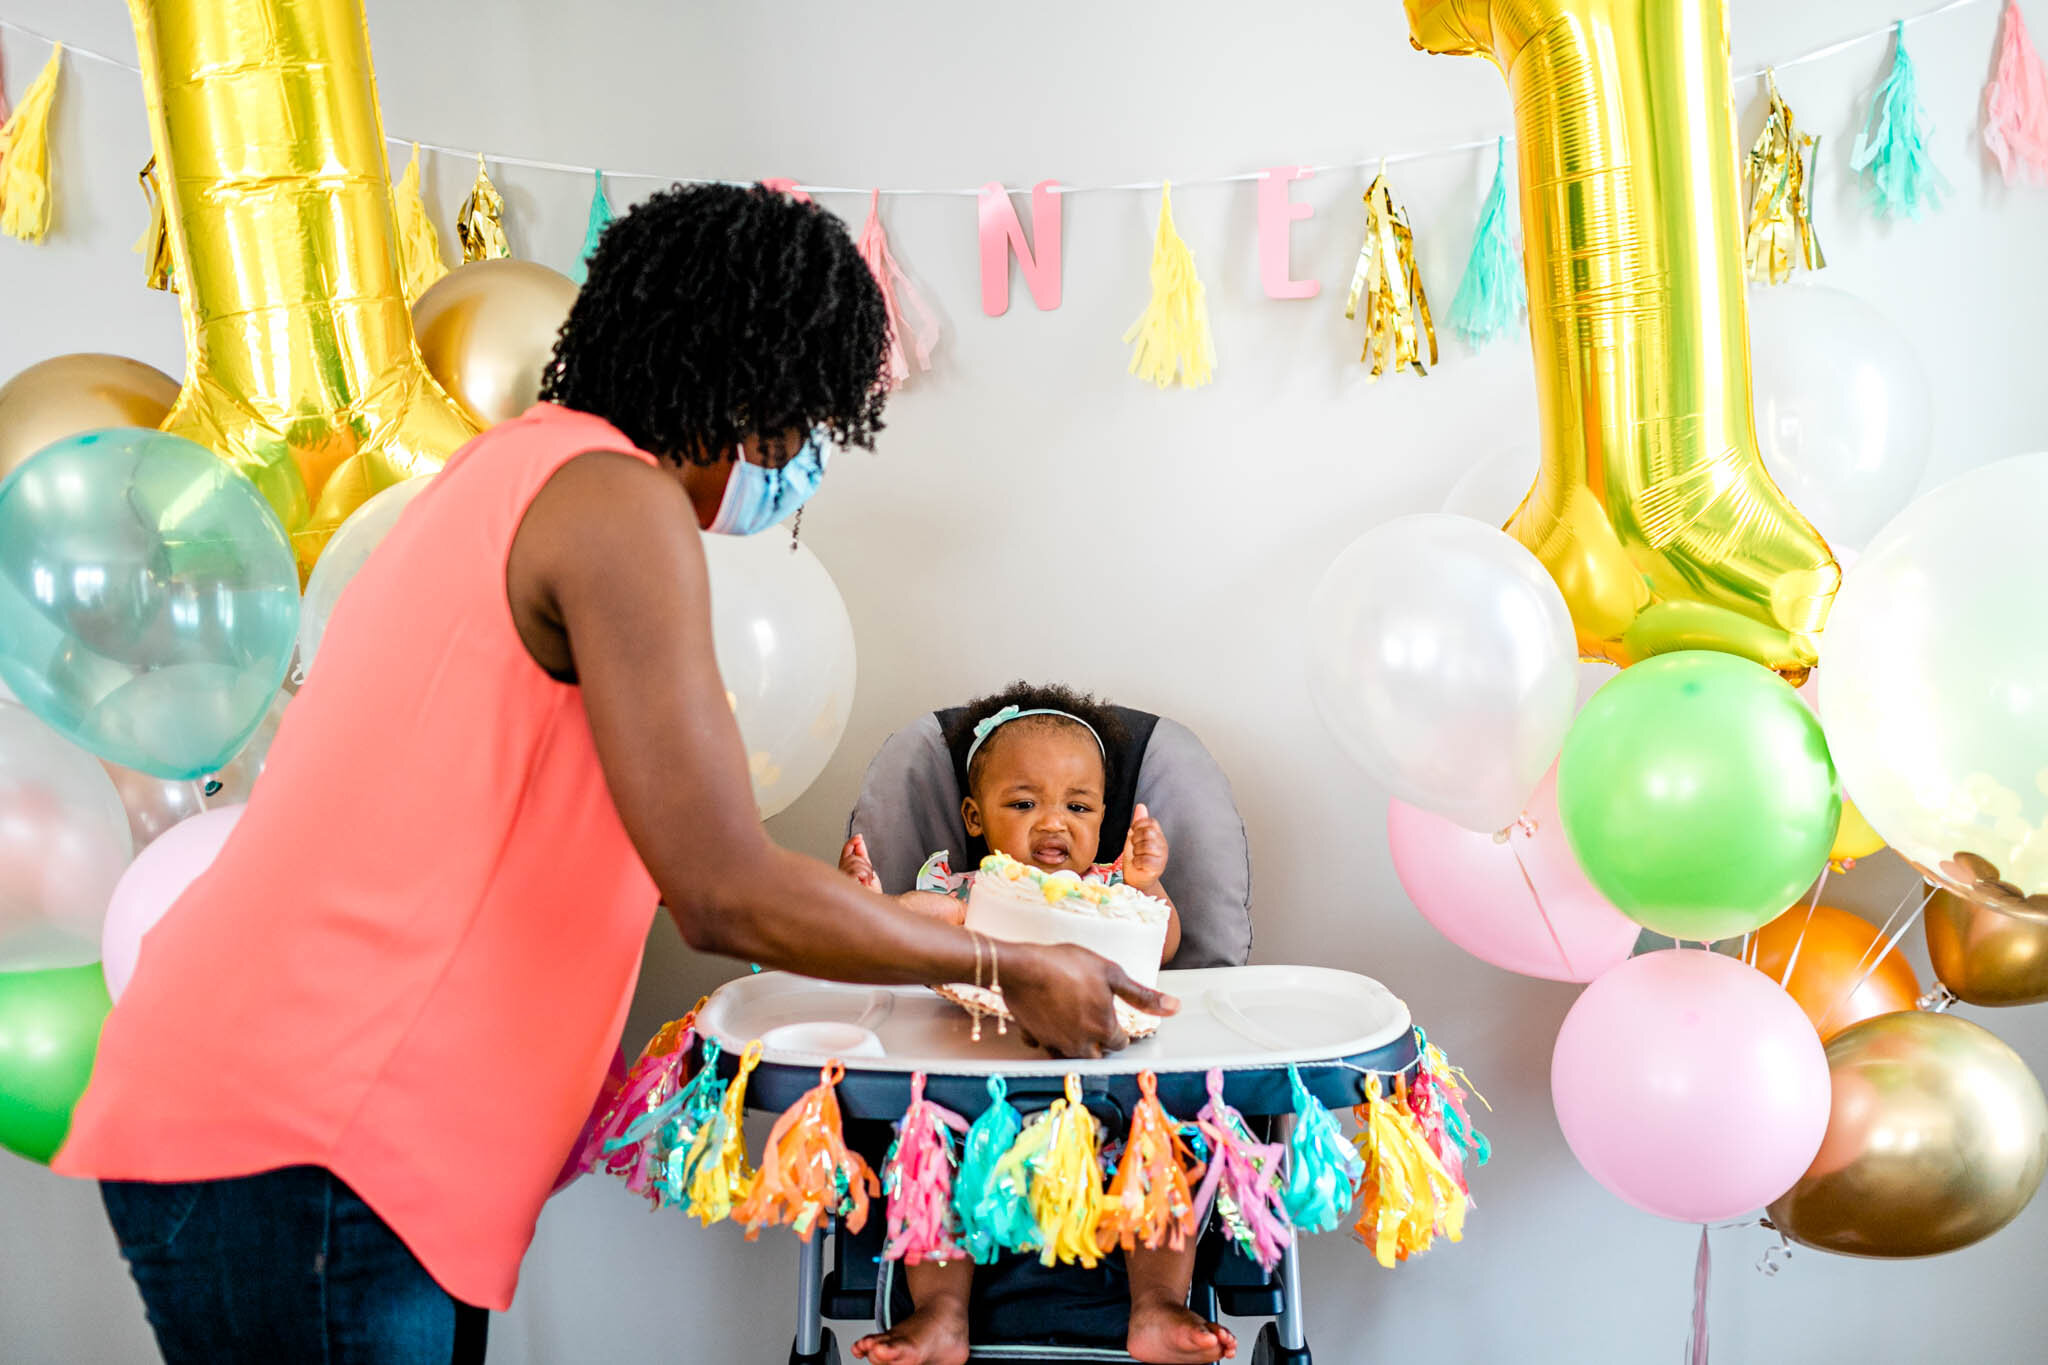 Durham Family Photographer | By G. Lin Photography | First Birthday celebration with mom giving cake to baby girl